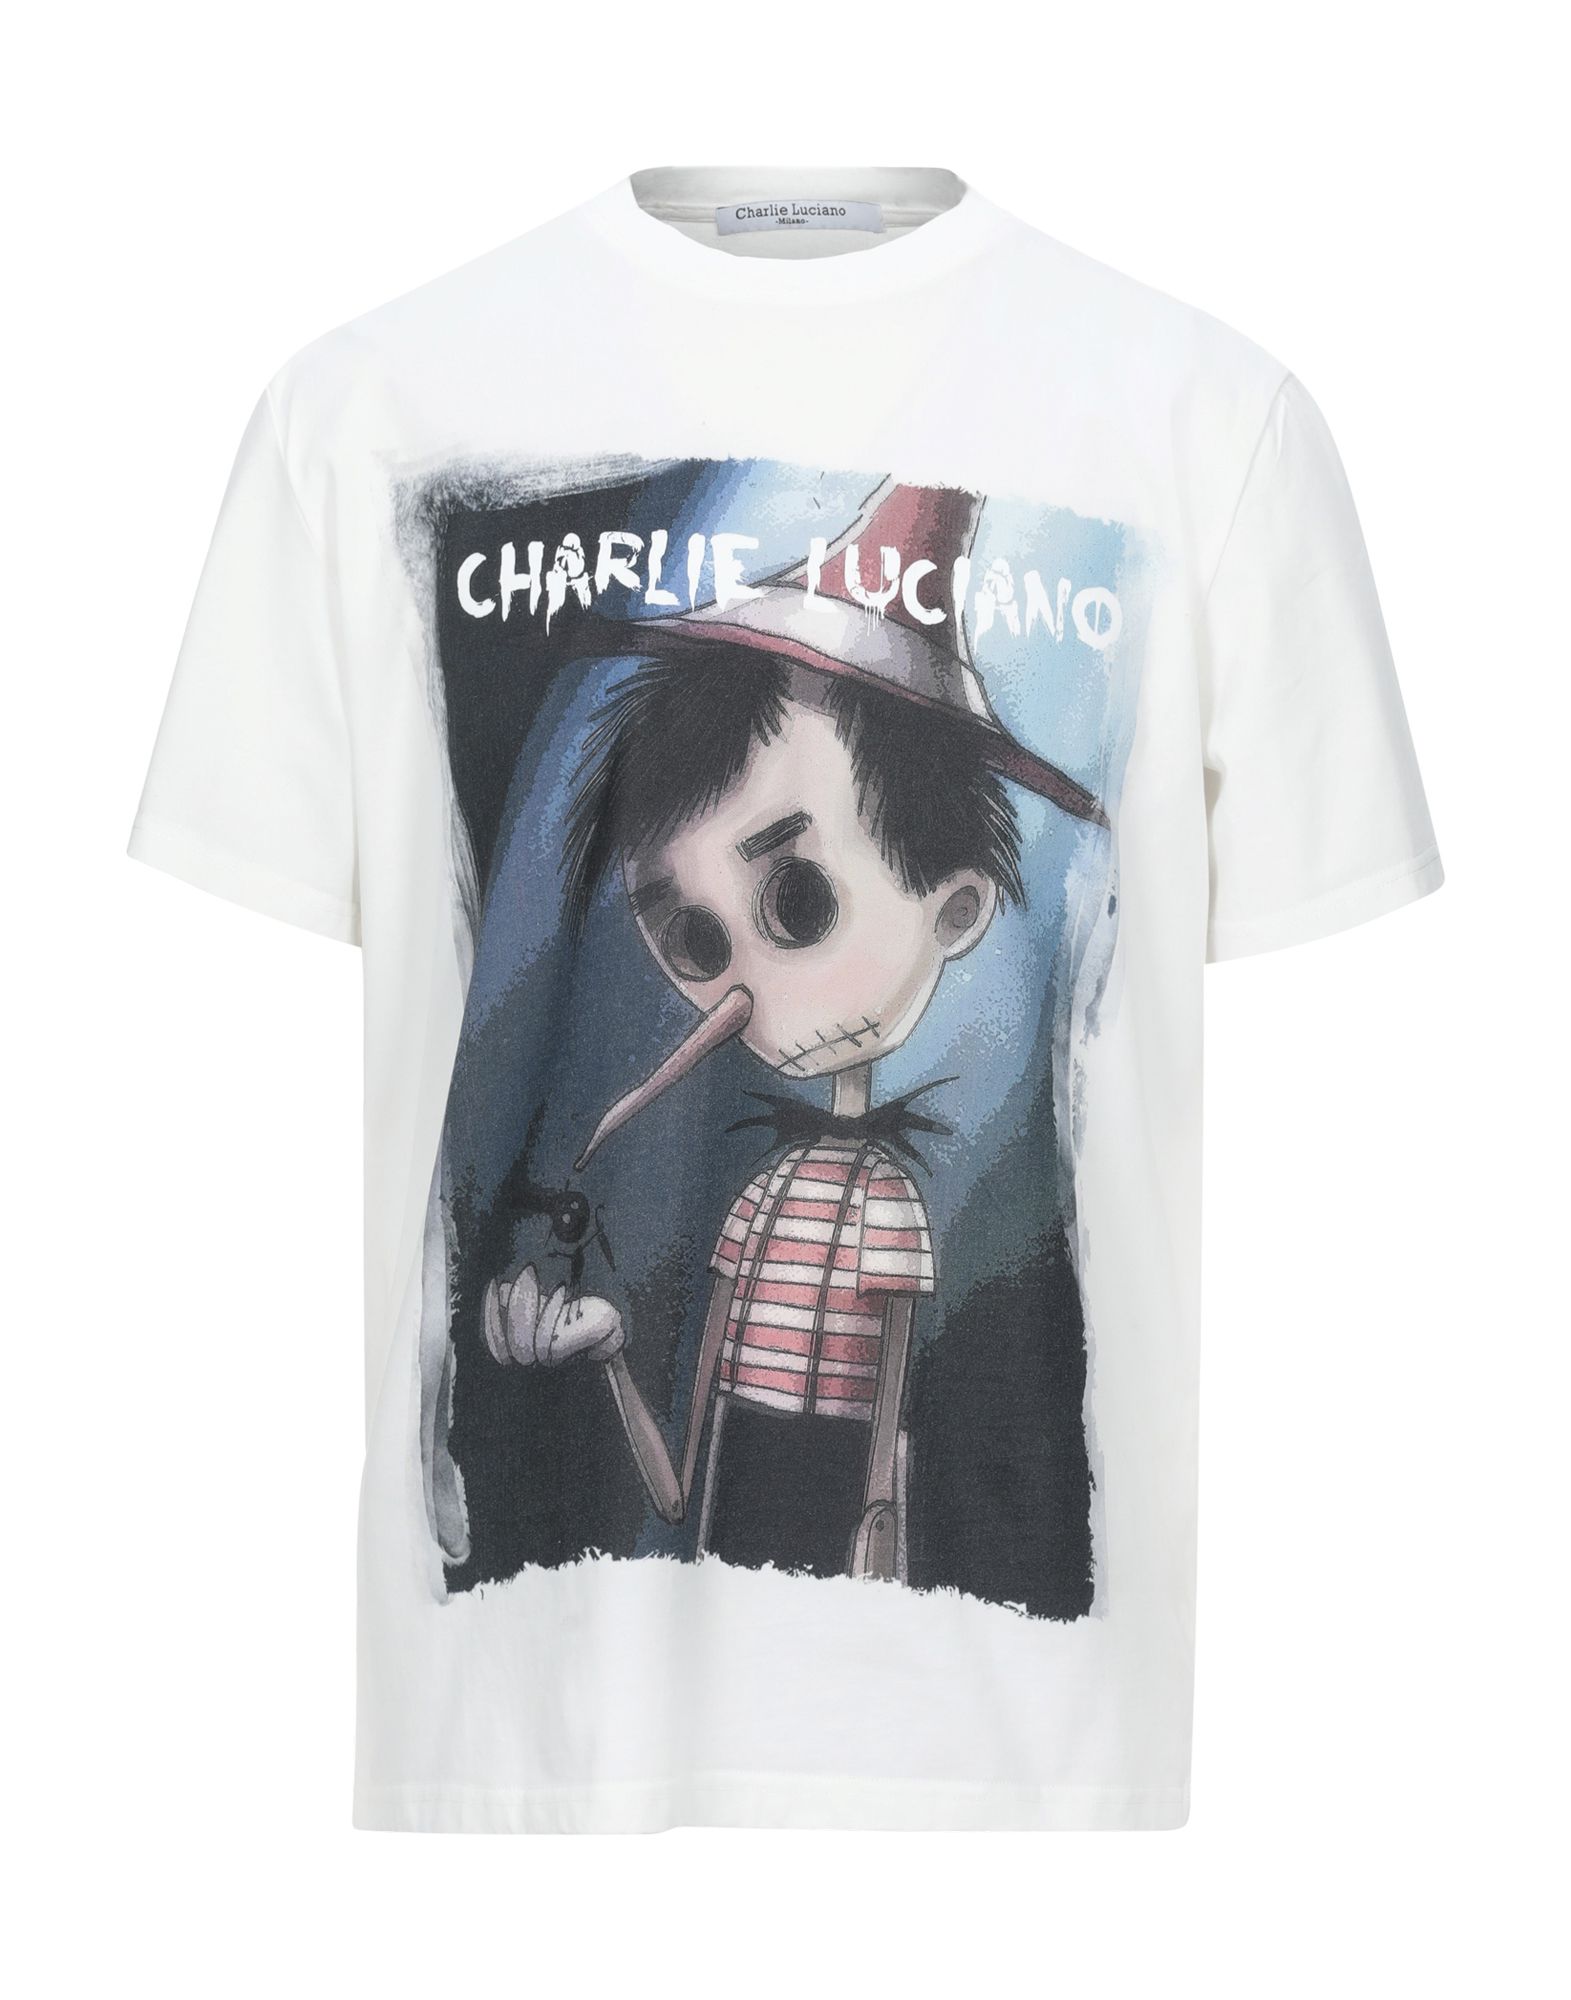 CHARLIE LUCIANO CHARLIE LUCIANO T-shirts from yoox.com | Daily Mail